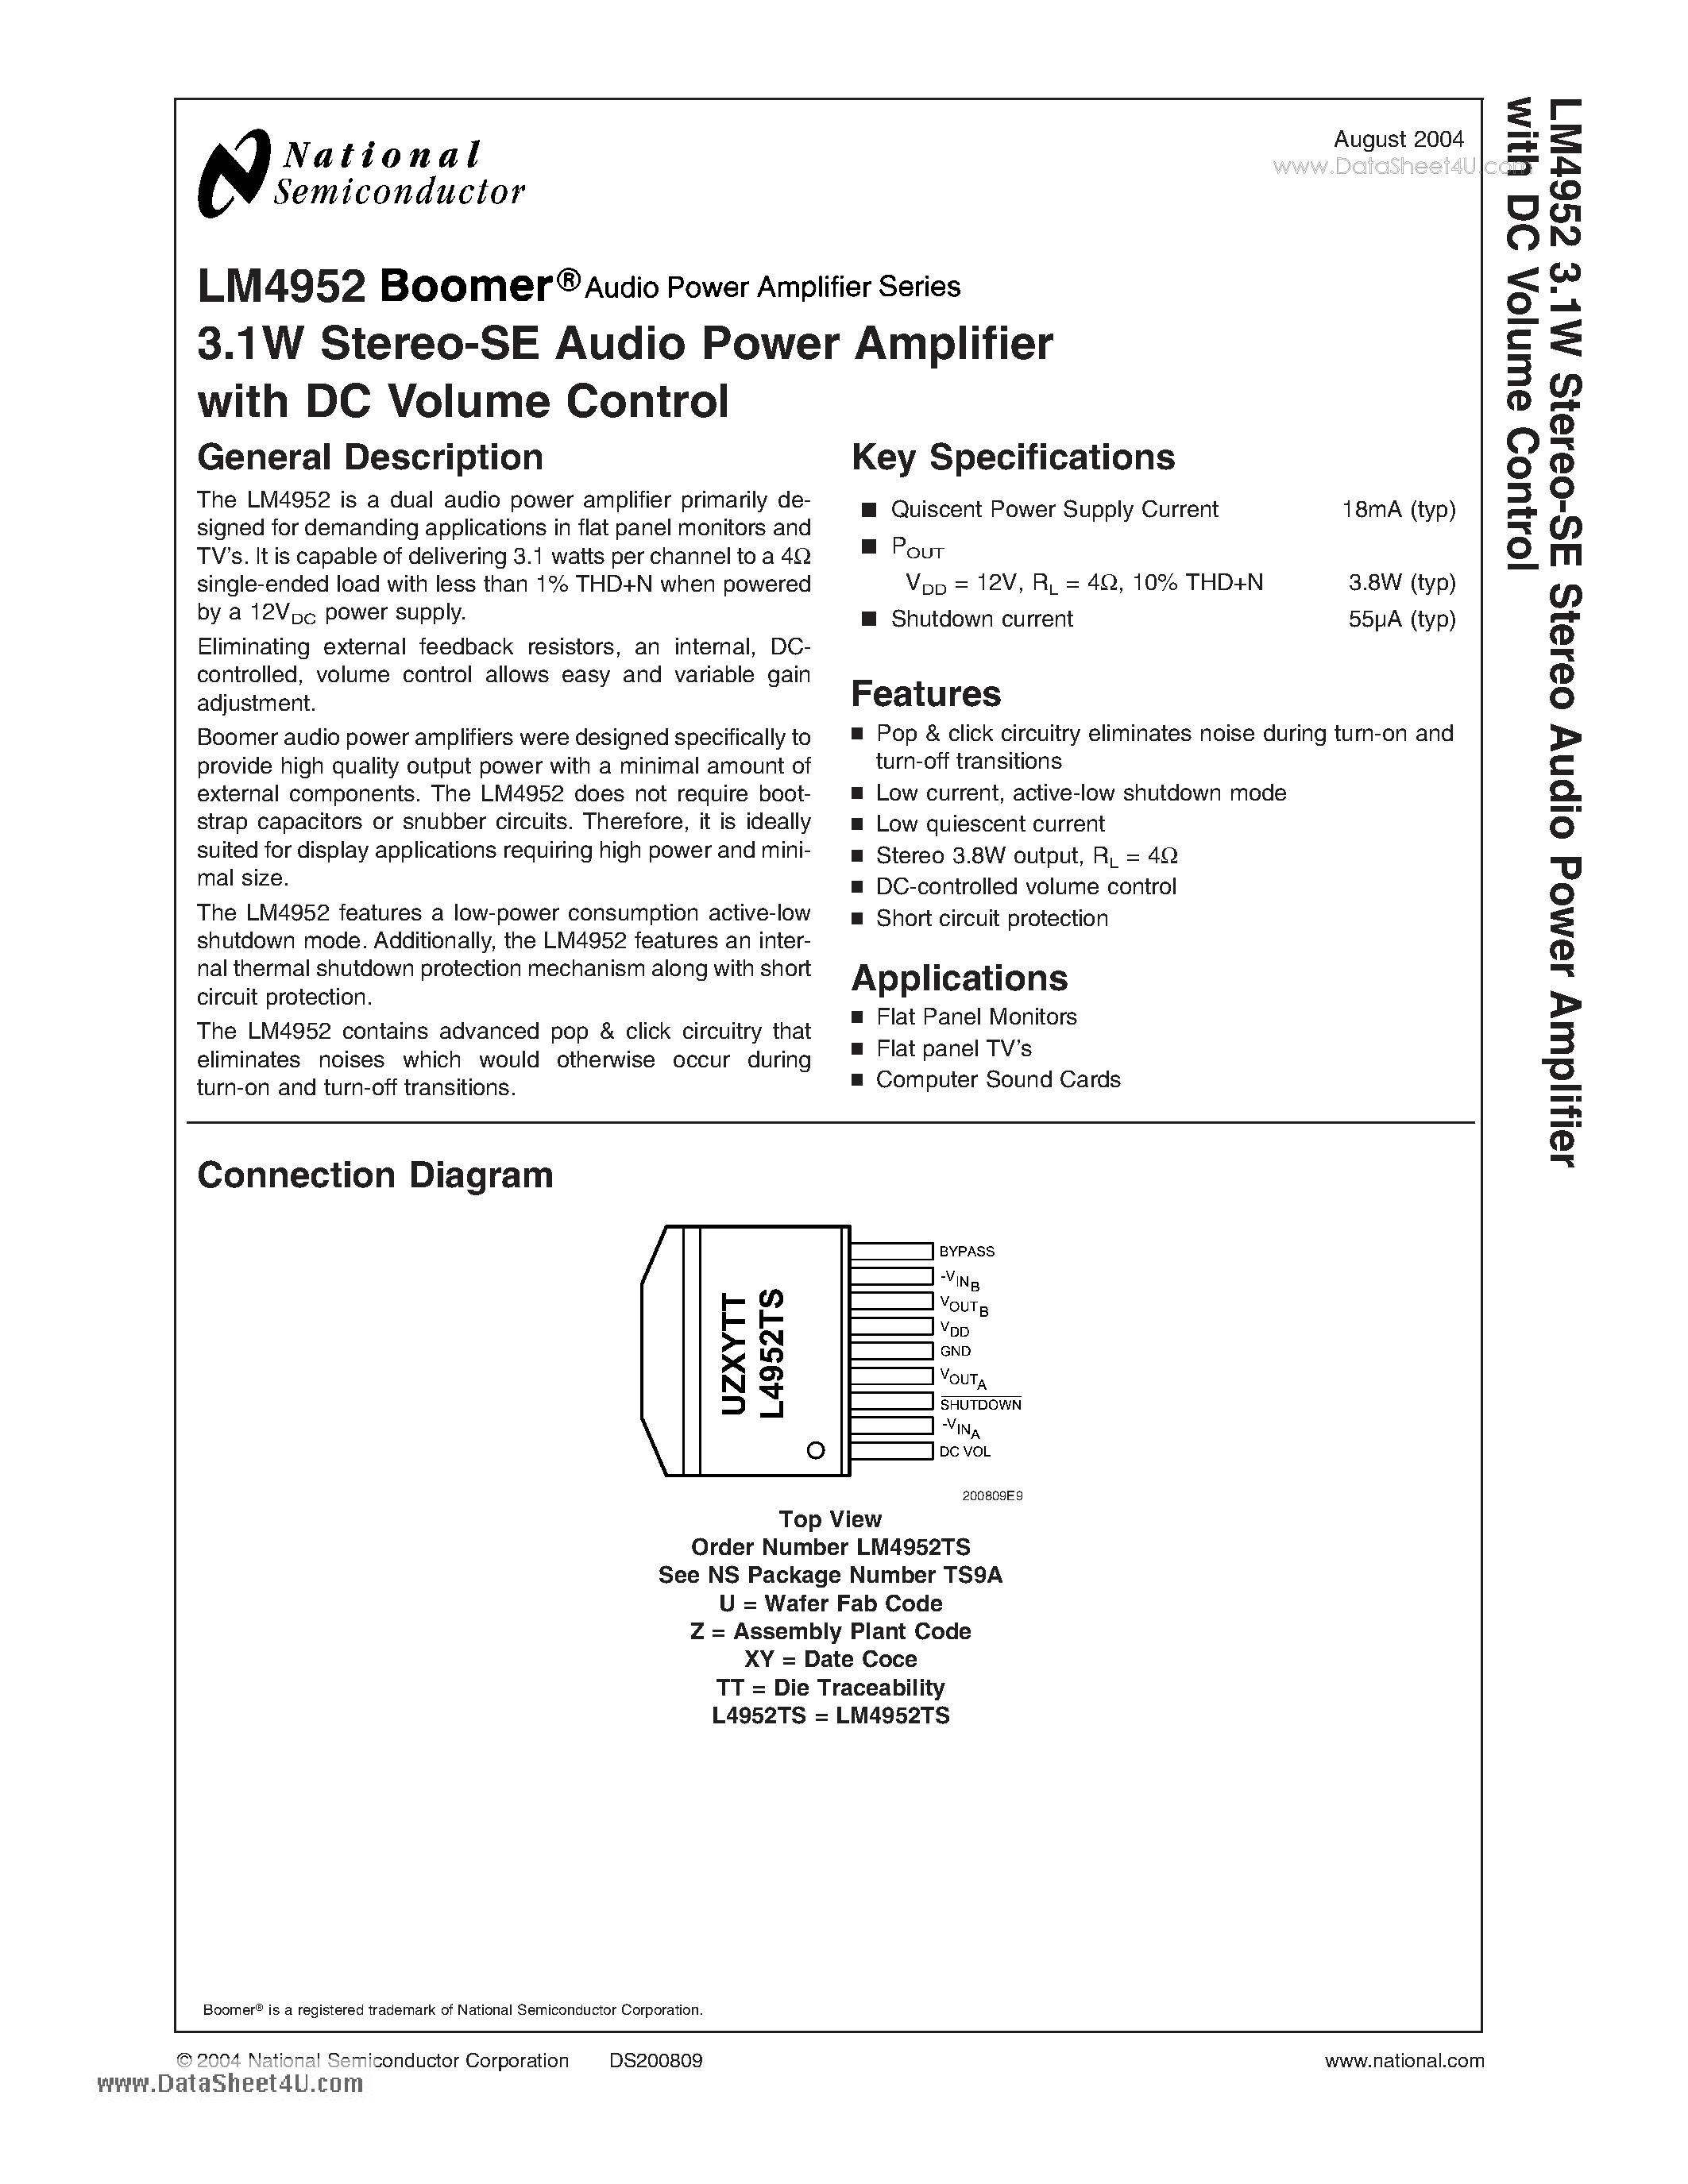 Datasheet LM4952 - 3.1W Stereo-SE Audio Power Amplifier page 1